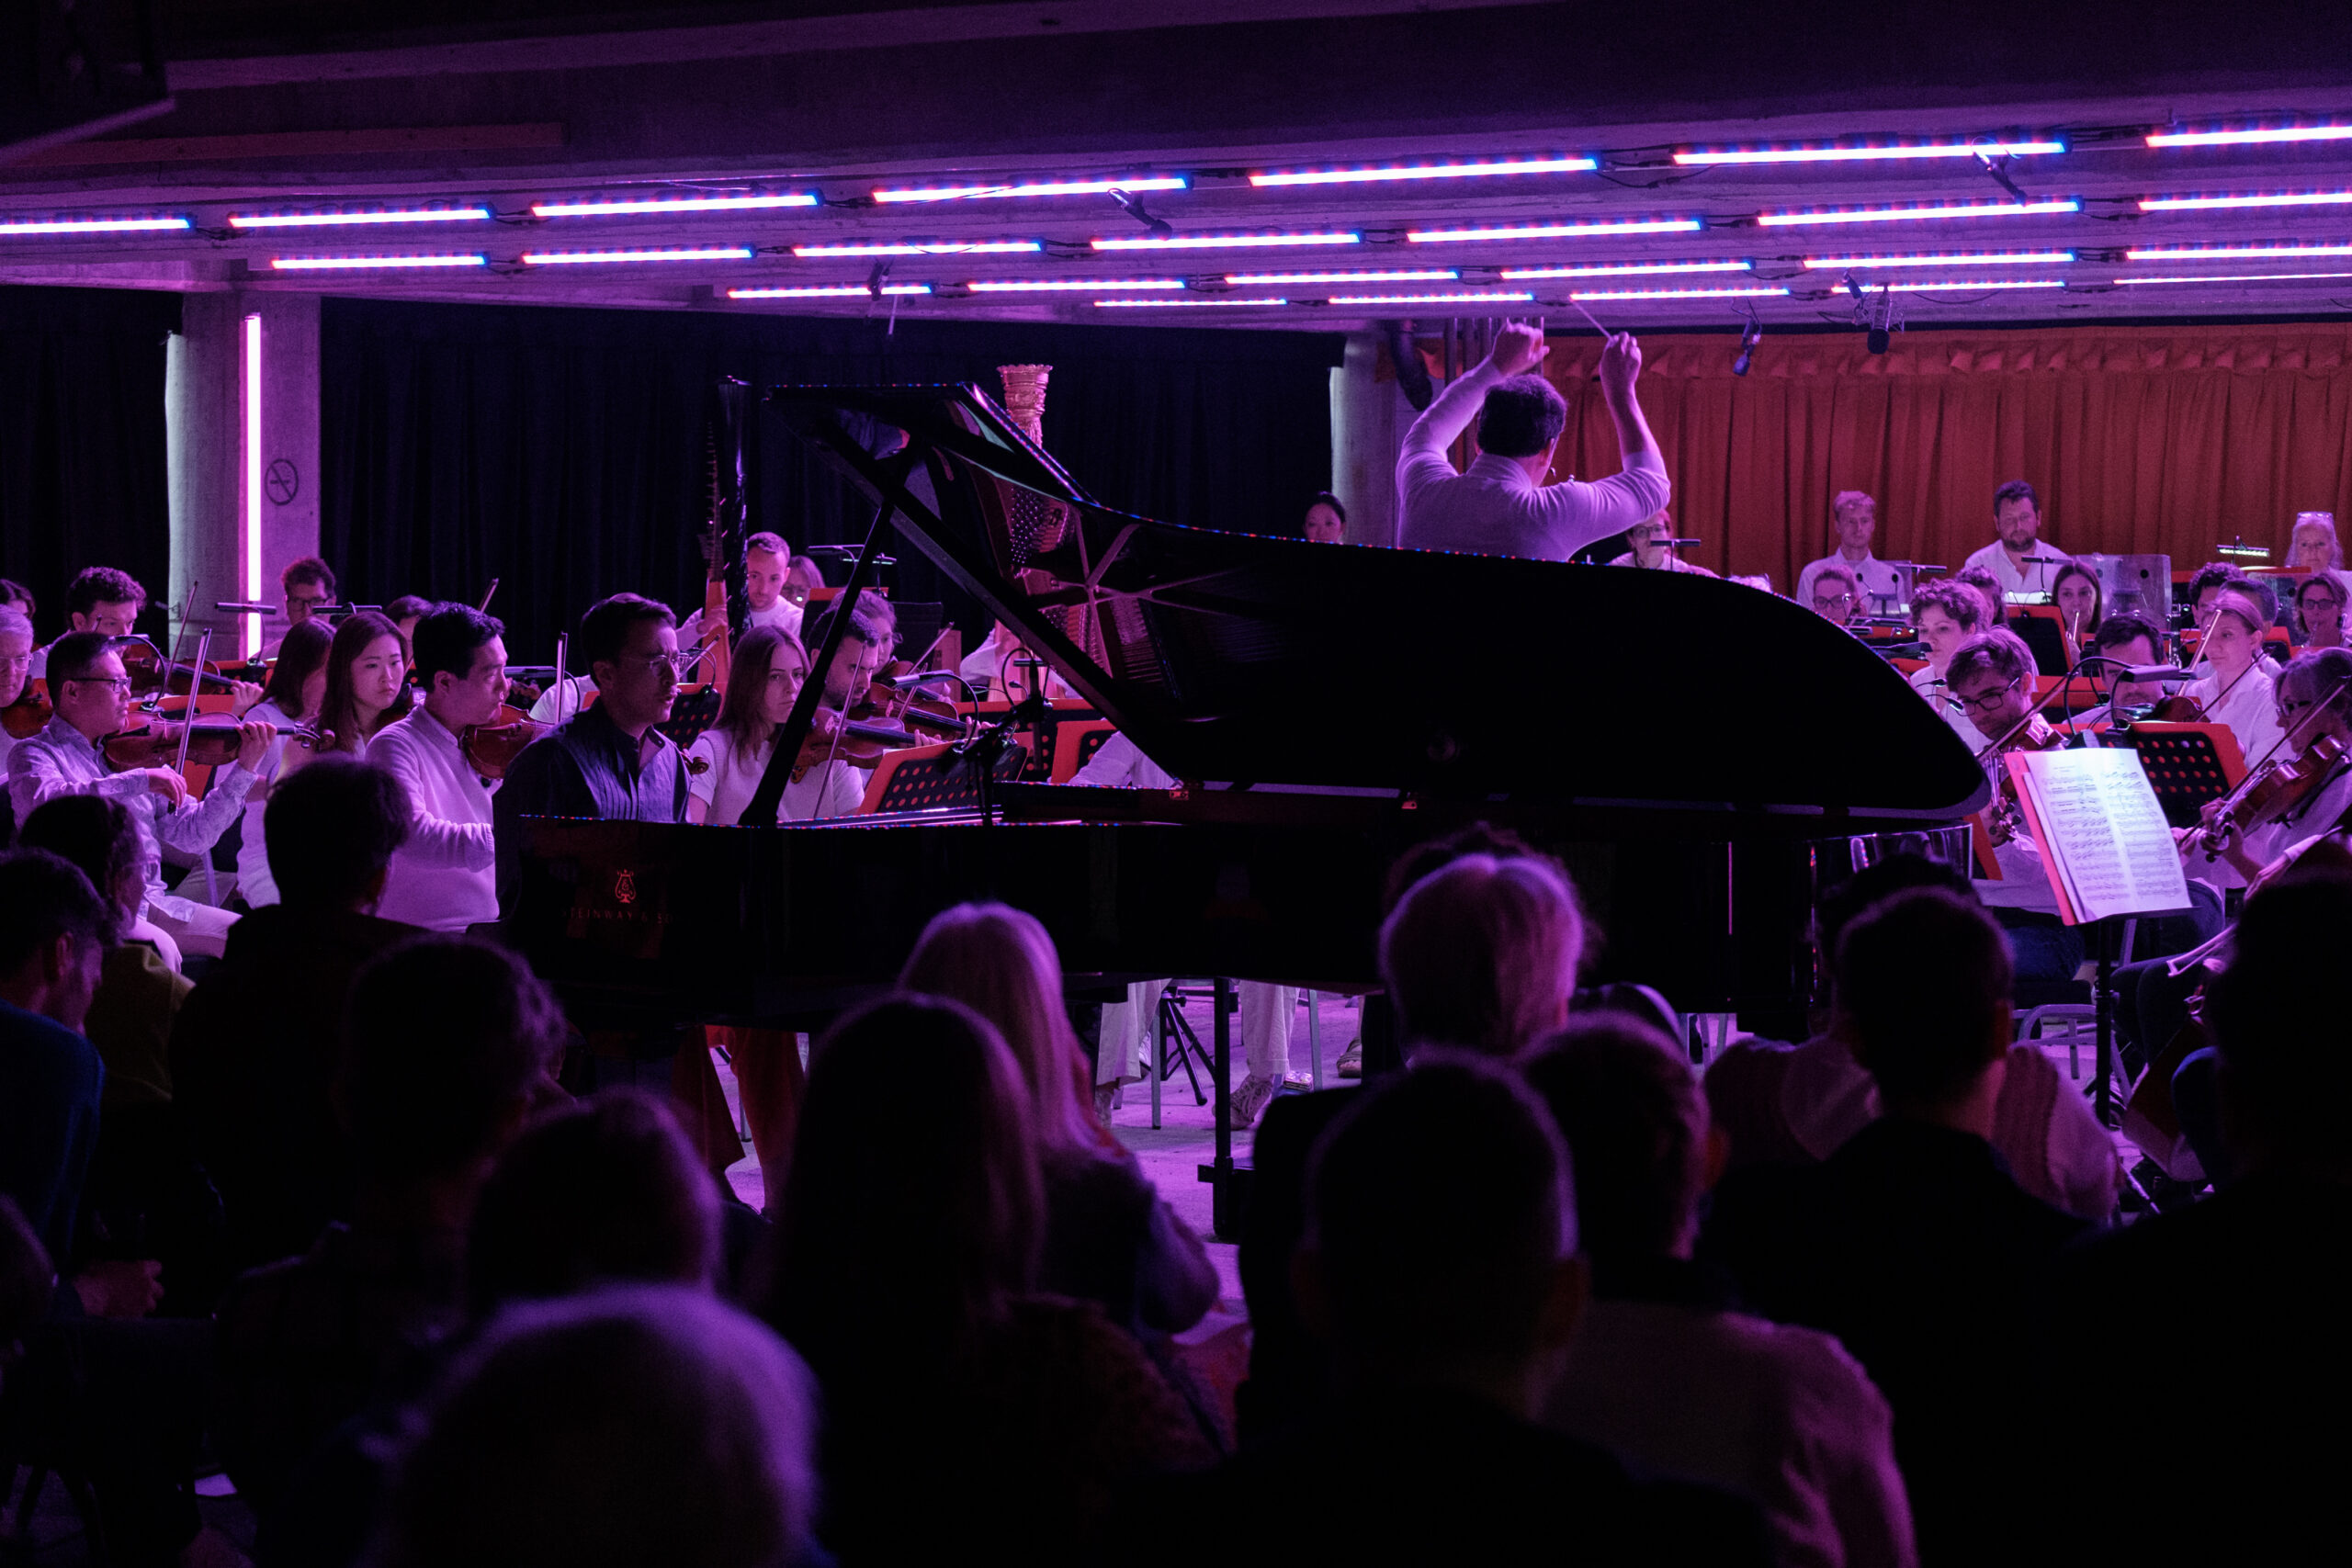 ID: a focused pianist and orchestra are seen next to the back of an active conductor. They are set against a concrete surround with a golden-brown curtain behind them and a lines of warm purple lighting on the ceiling. The back of the first line of audience members are seen in the foreground, looking on.